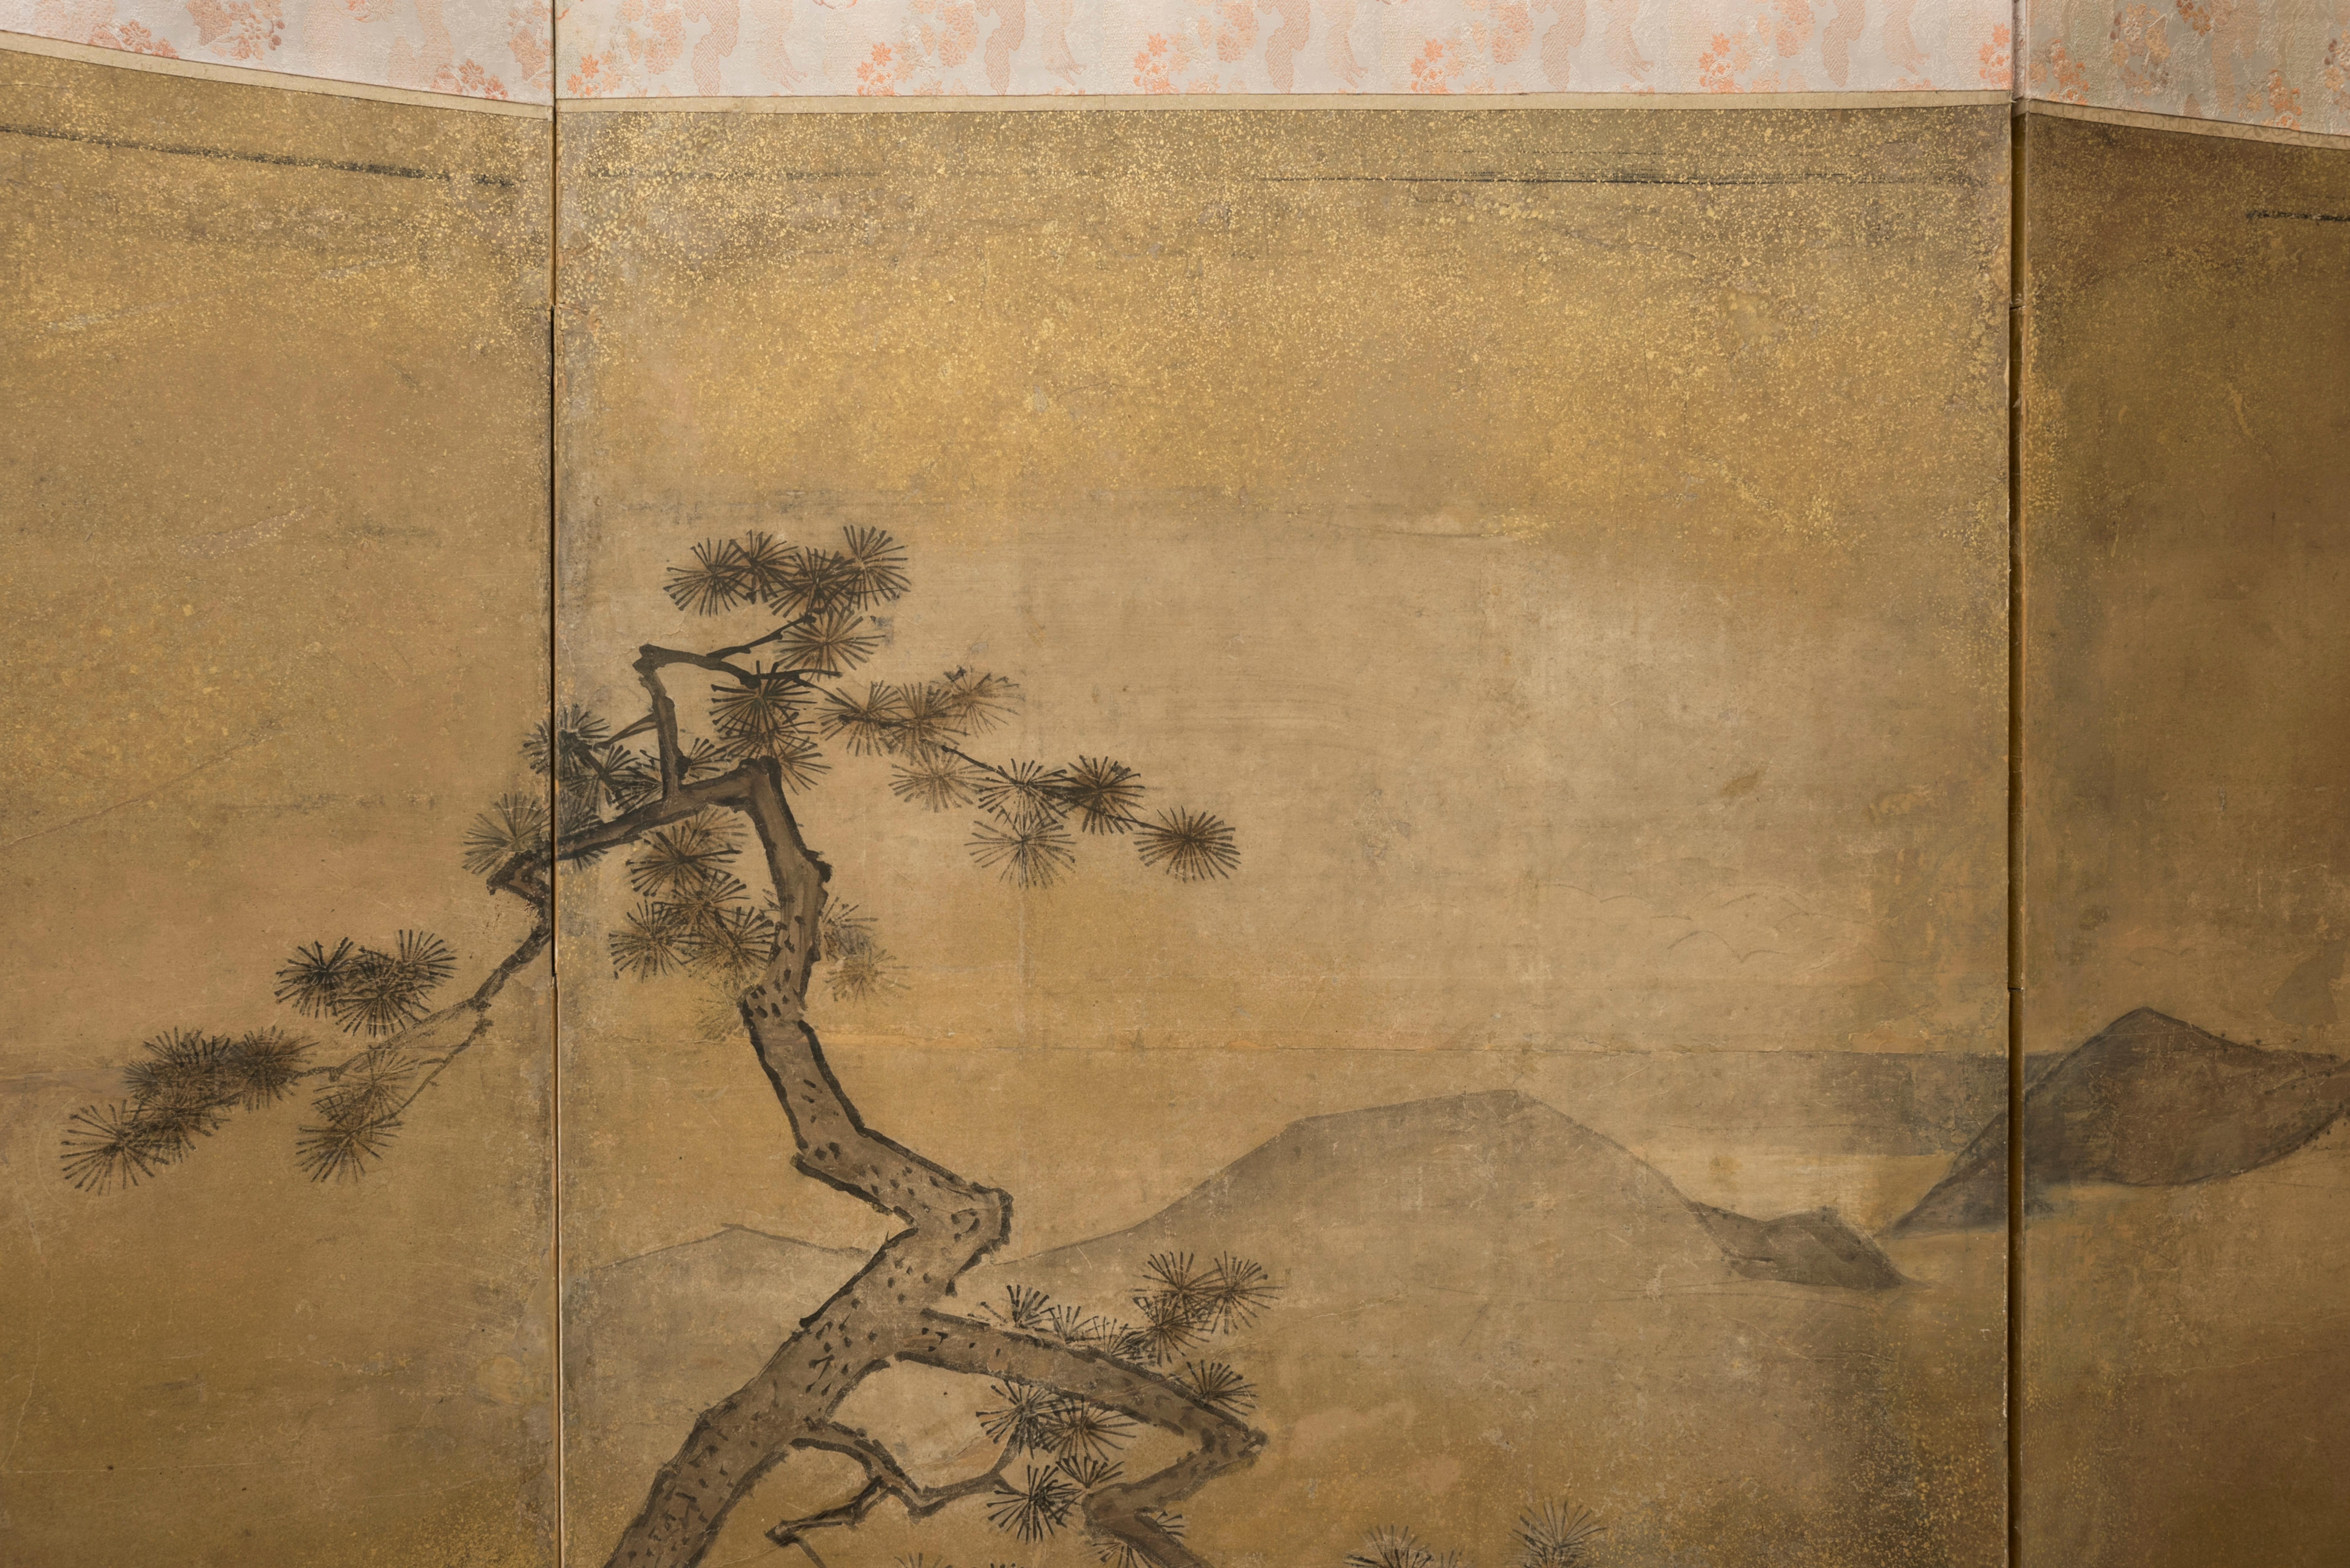 Six-panels screen depicting the exit from the city of a Chinese emperor on horseback and his concubine in a luxurious palanquin. 

It may be a scene illustrating the poem The Song of Everlasting Sorrow (Chang hen ge, ???) written by Bai Juyi